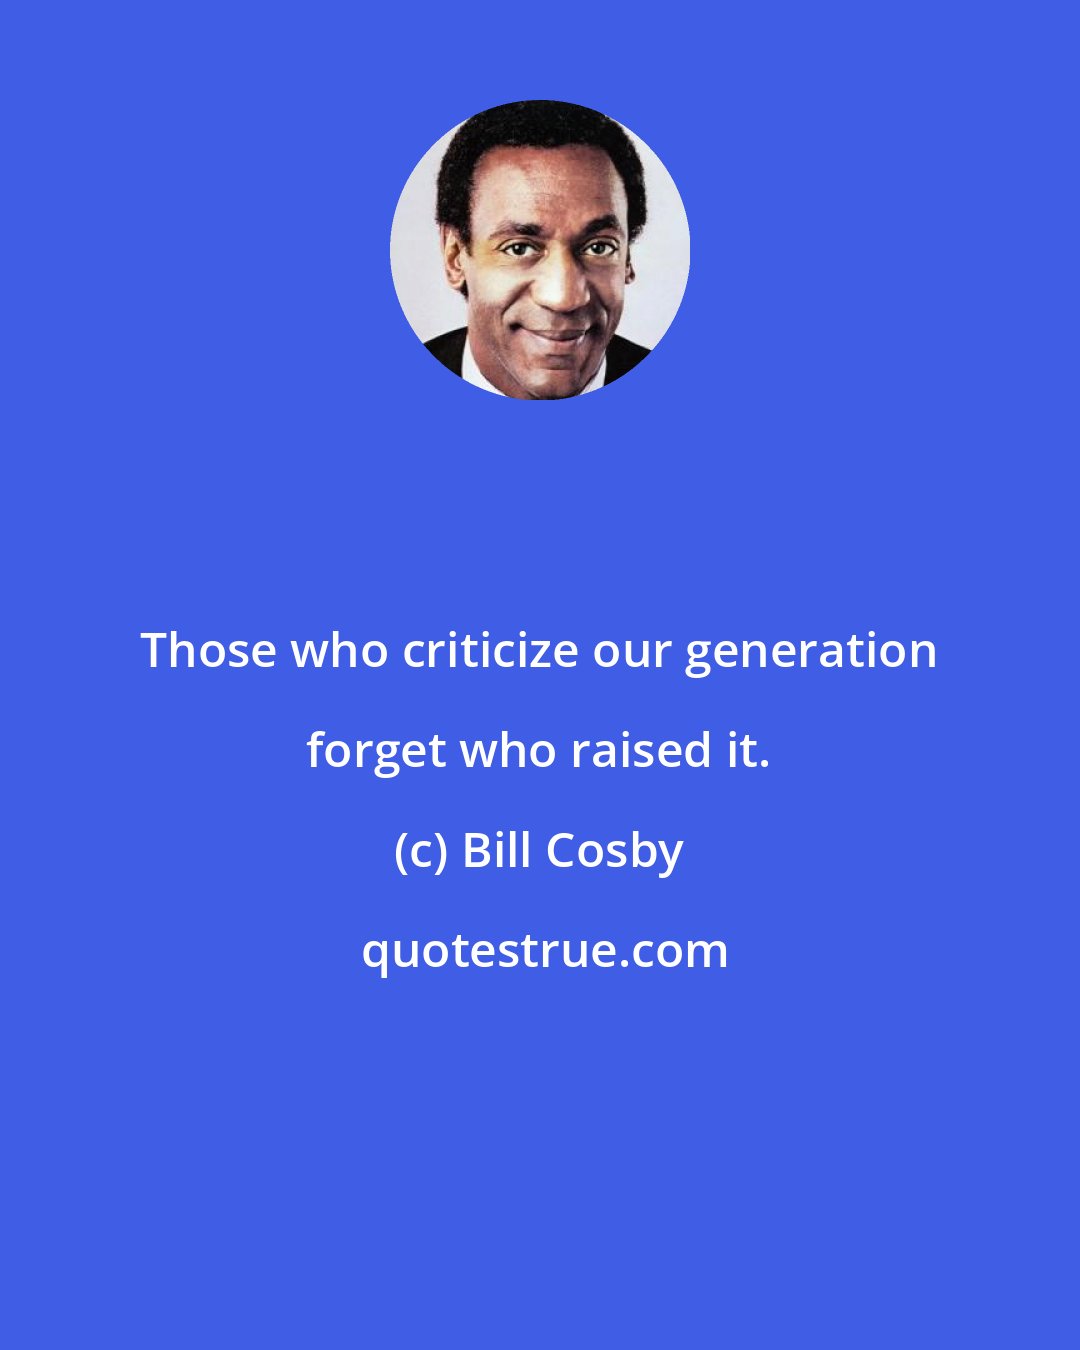 Bill Cosby: Those who criticize our generation forget who raised it.